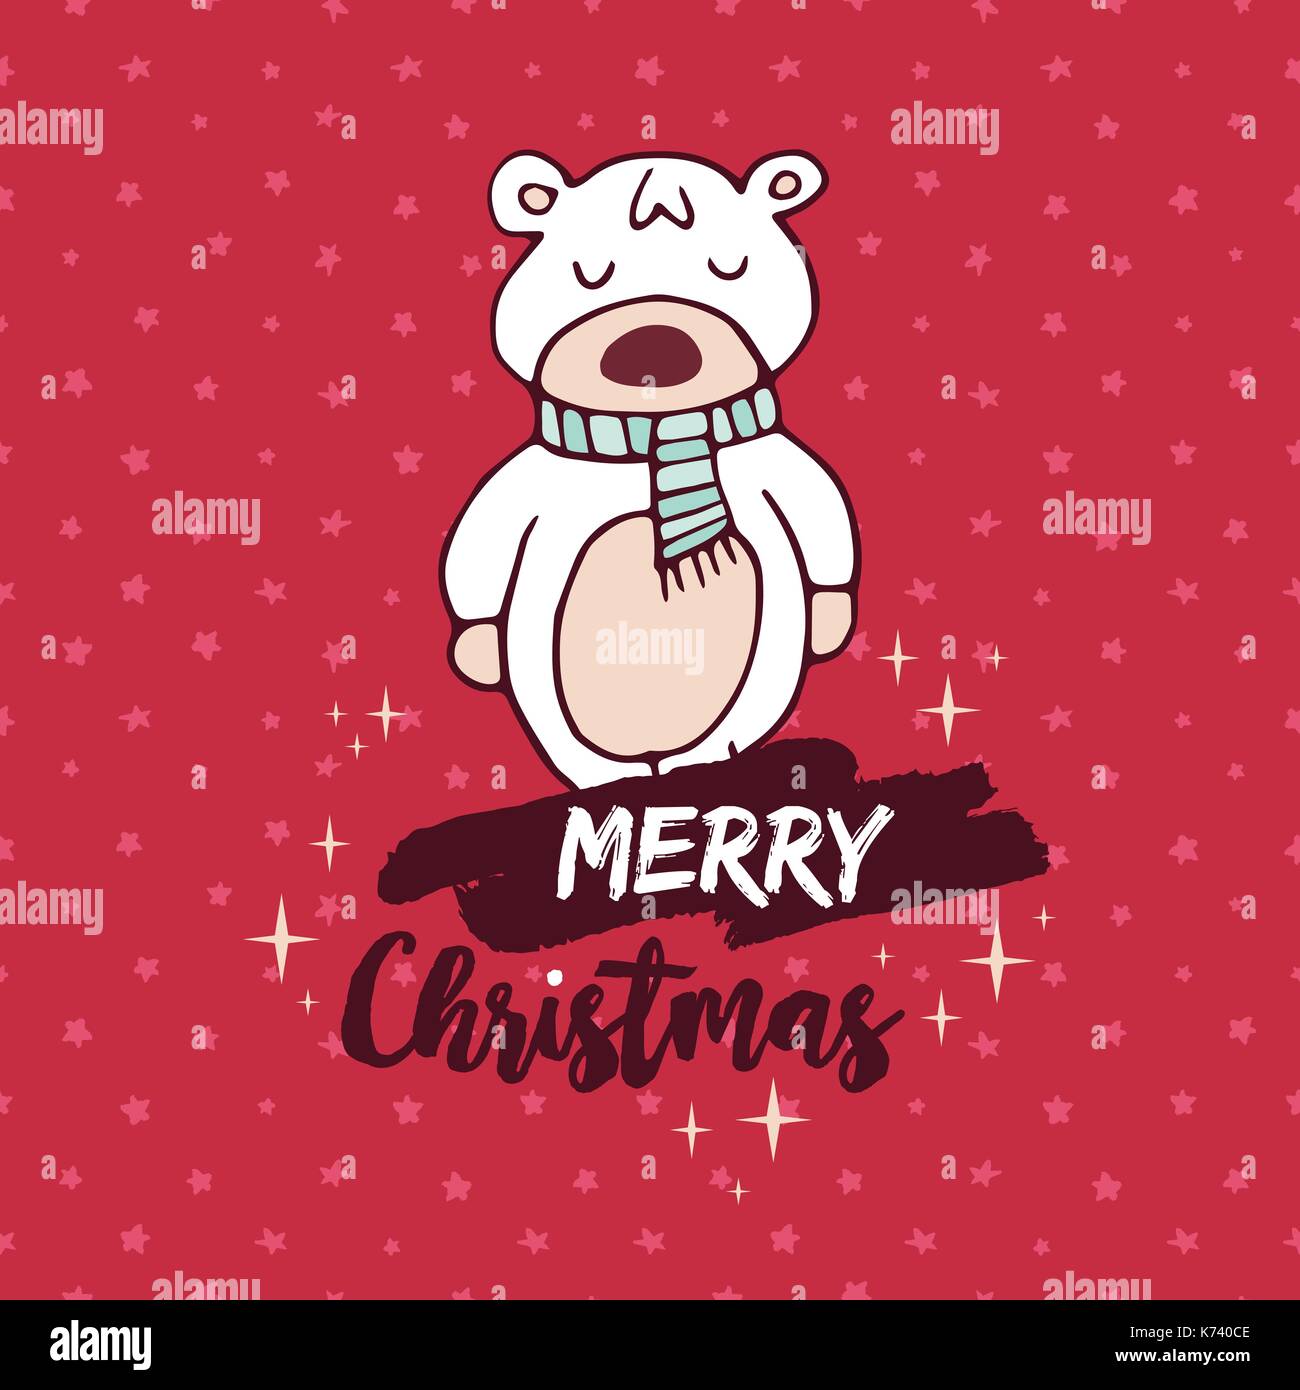 Merry Christmas red hand drawn greeting card. Cute baby polar bear cartoon with handwritten holiday quote. EPS10 vector. Stock Vector